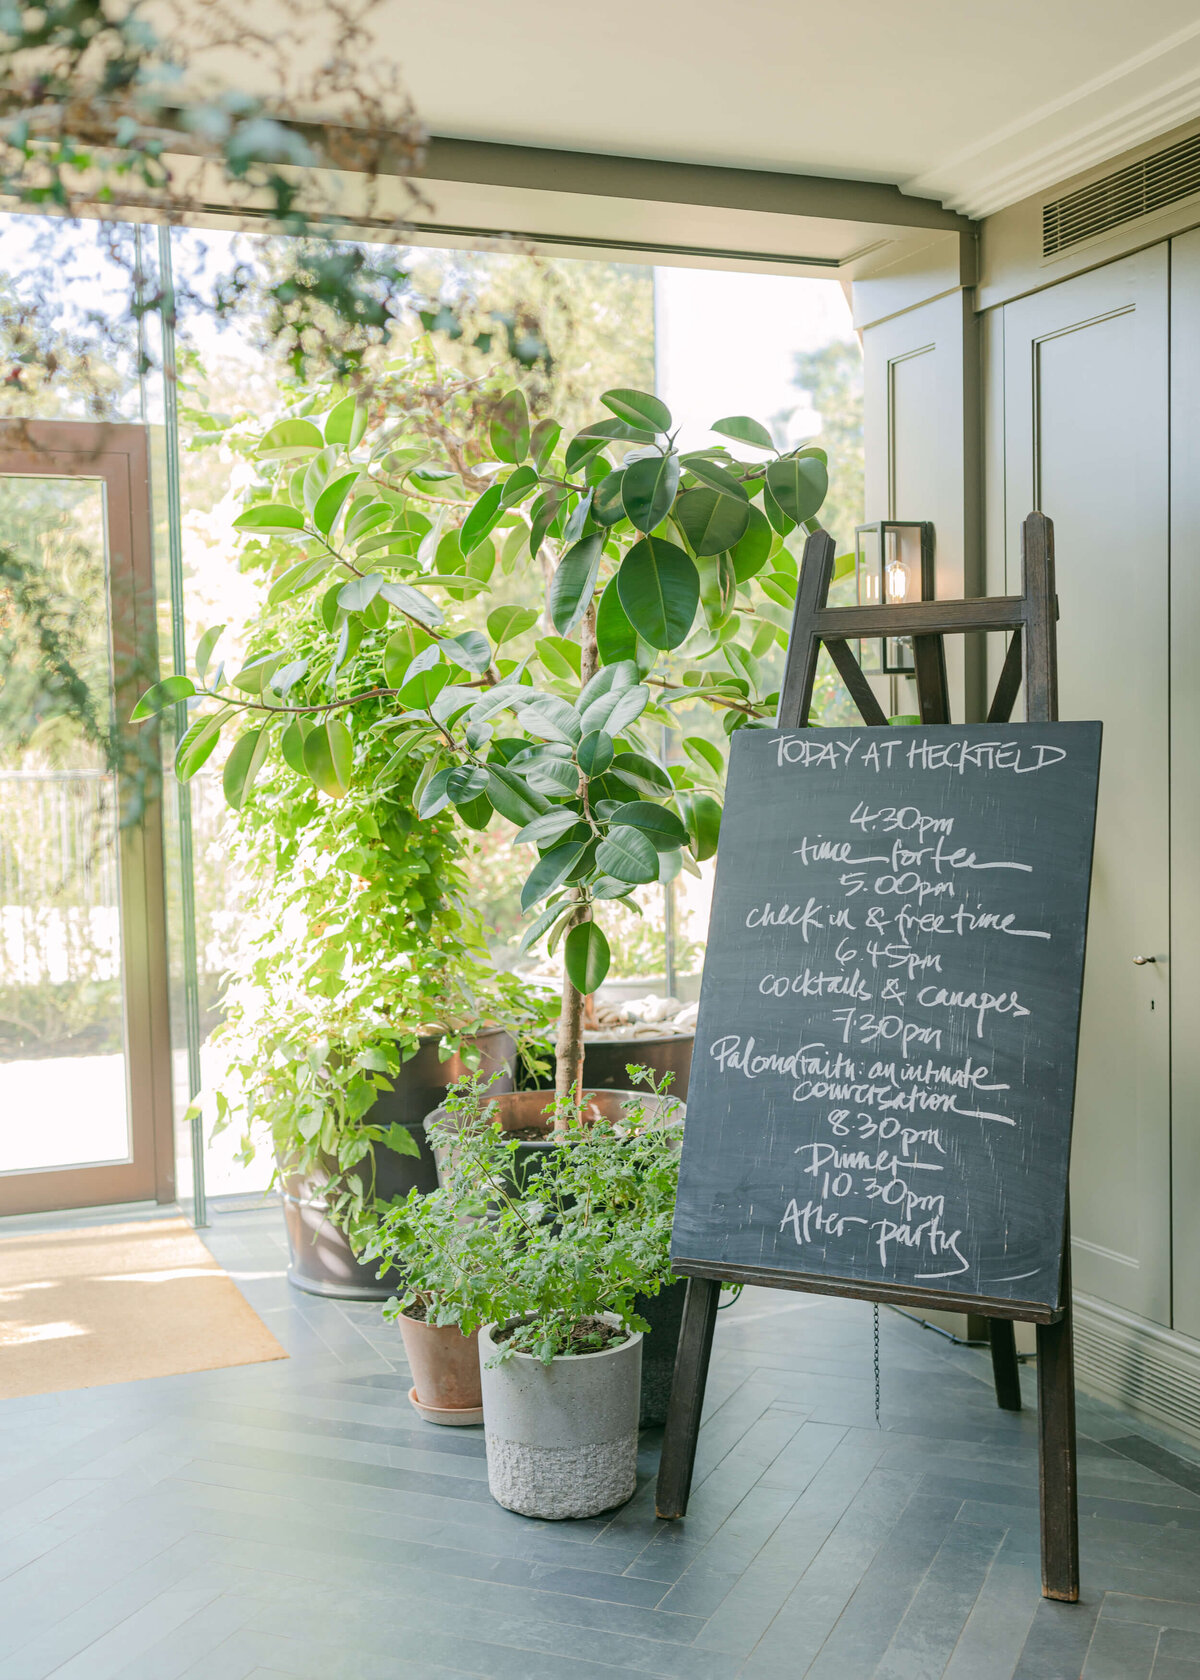 chloe-winstanley-events-heckfield-place-interiors-chalk-board